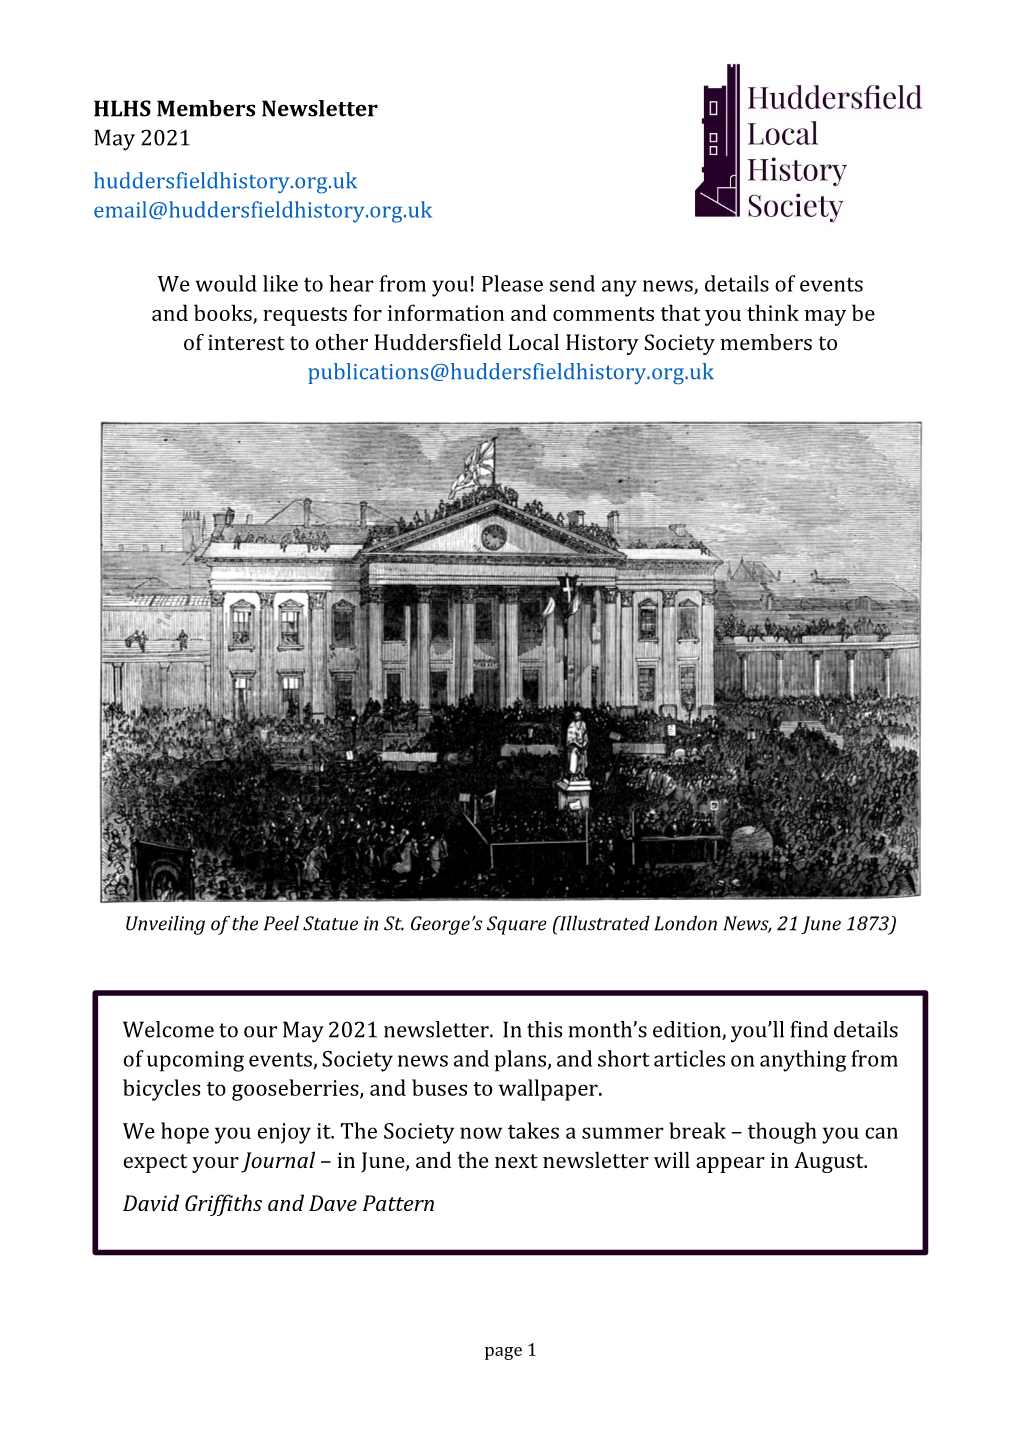 HLHS Members Newsletter May 2021 Huddersfieldhistory.Org.Uk Email@Huddersfieldhistory.Org.Uk